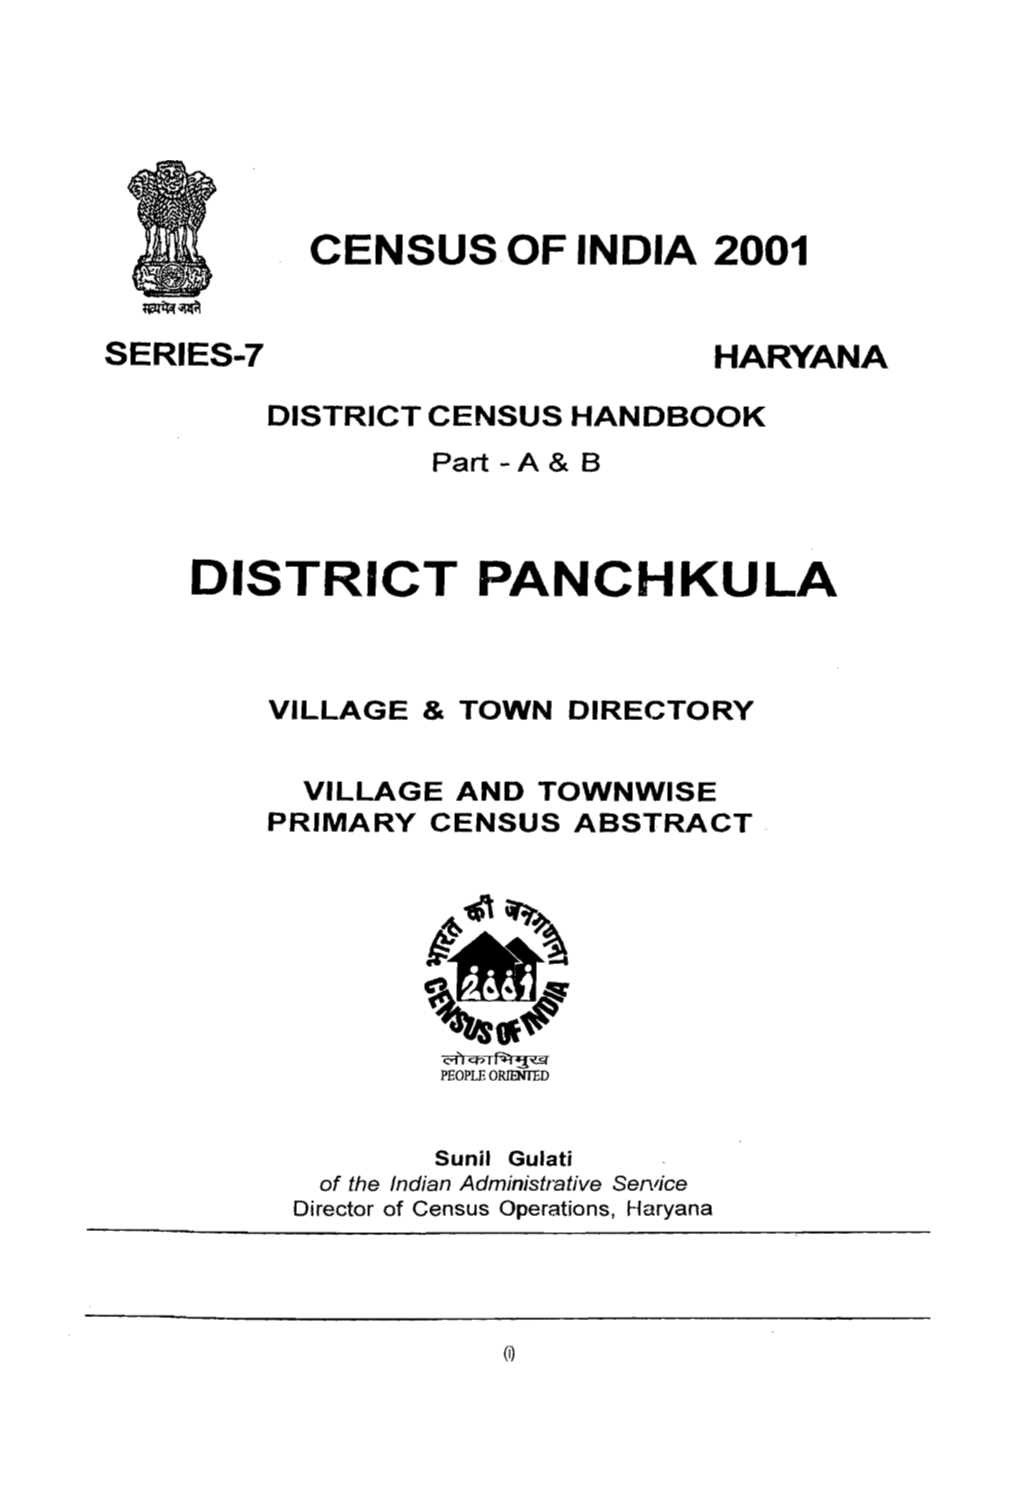 Village and Towwise Primary Census Abstract, Panchkula, Part XII- a & B